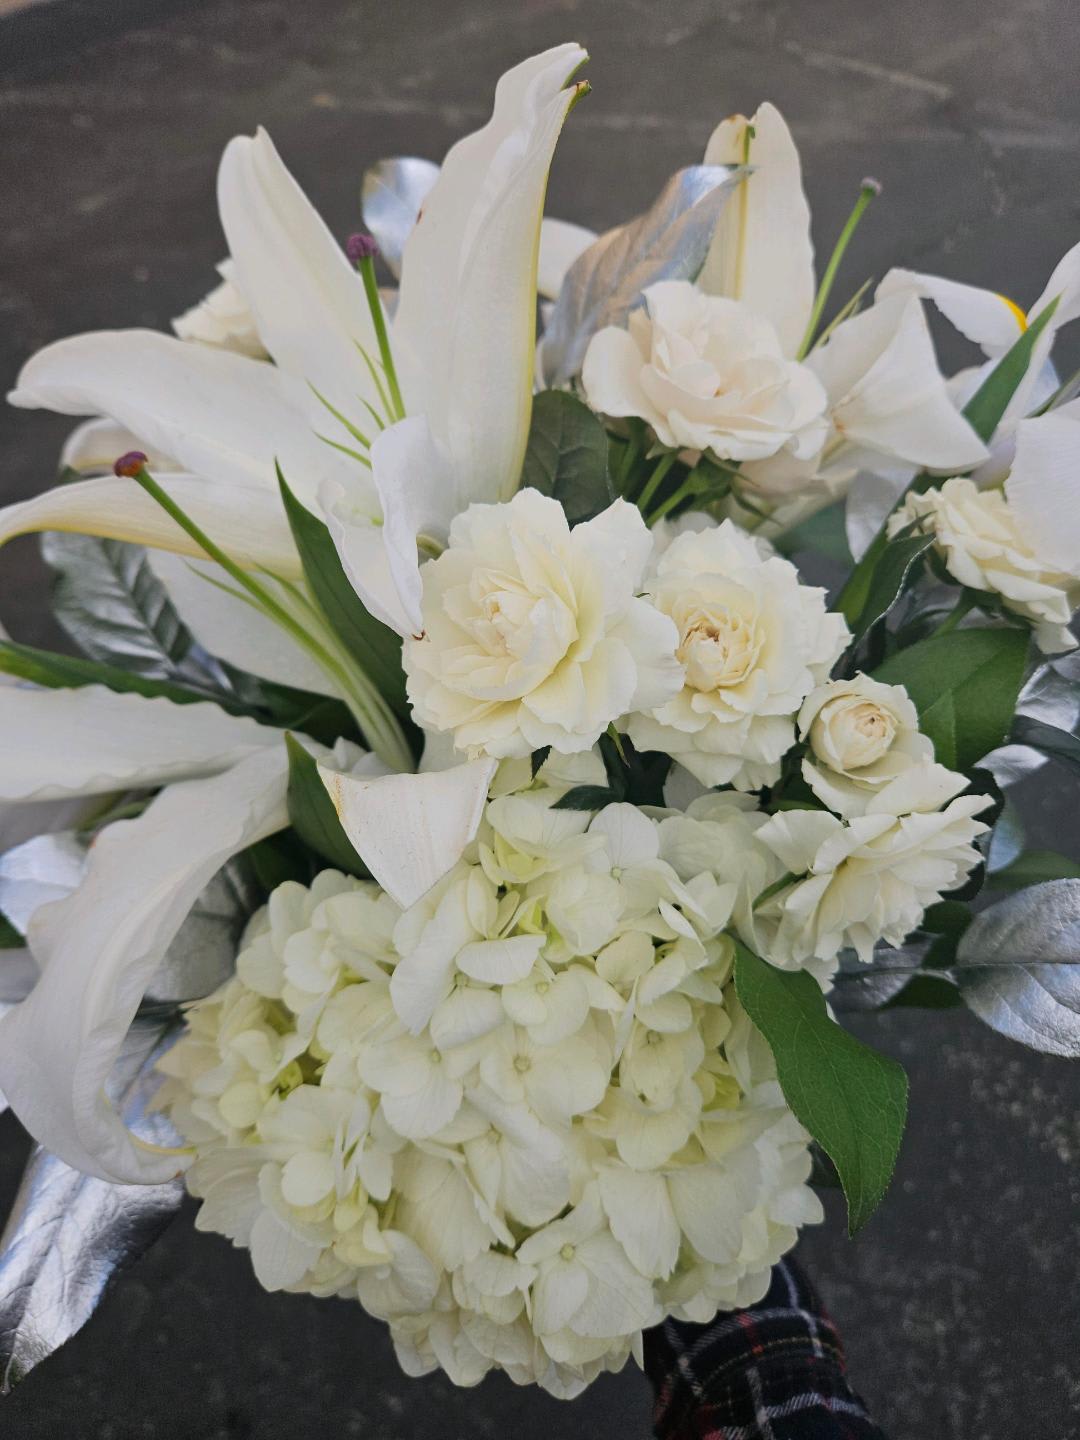 Designer's Choice in Whites - Vased designer's choice arrangement of our freshest blooms in whites. NOTE!! Flowers pictured here are for an example, these specific flowers won't necessarily be used in arrangement.